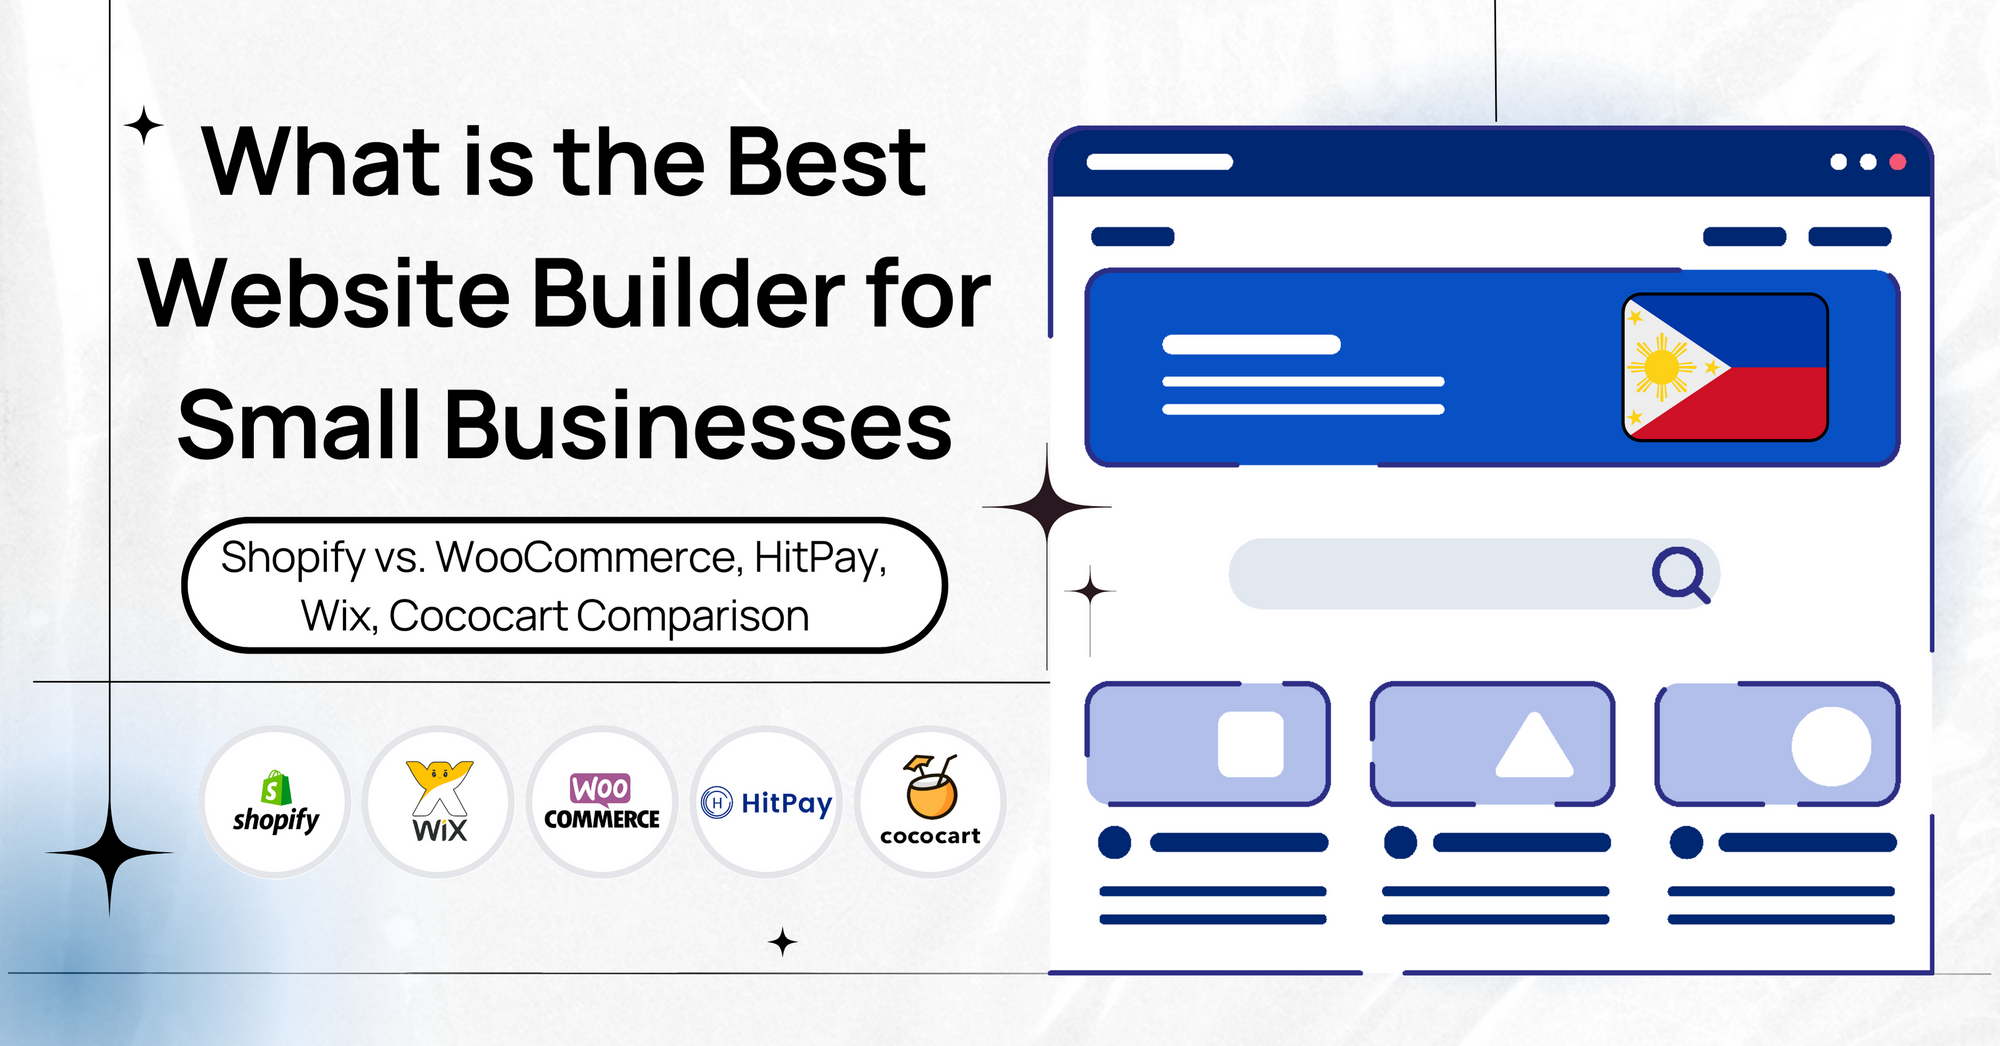 What is the Best Website Builder in the Philippines for Small Businesses: Shopify vs. WooCommerce, HitPay, Wix, Cococart Comparison